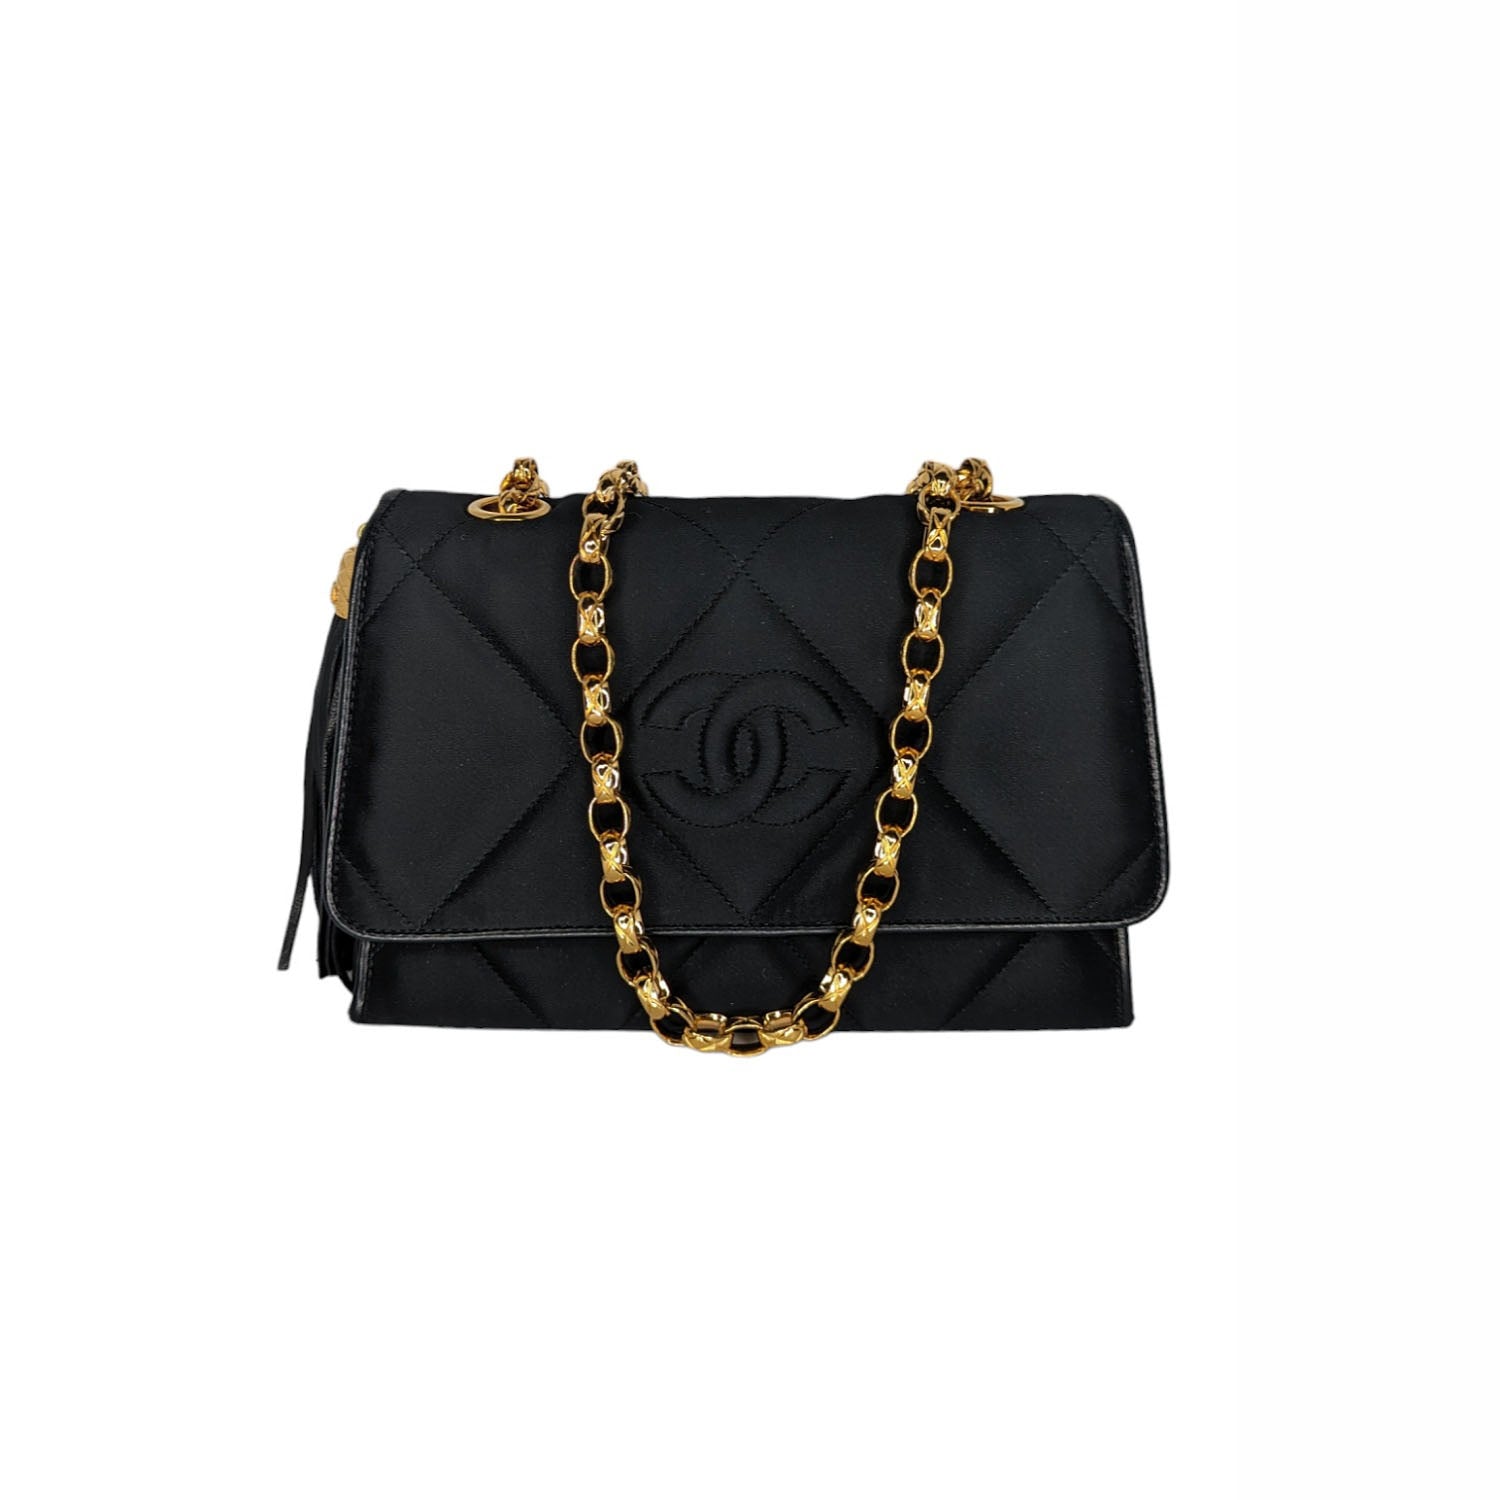 Chanel 19 leather handbag Chanel Black size Not specified